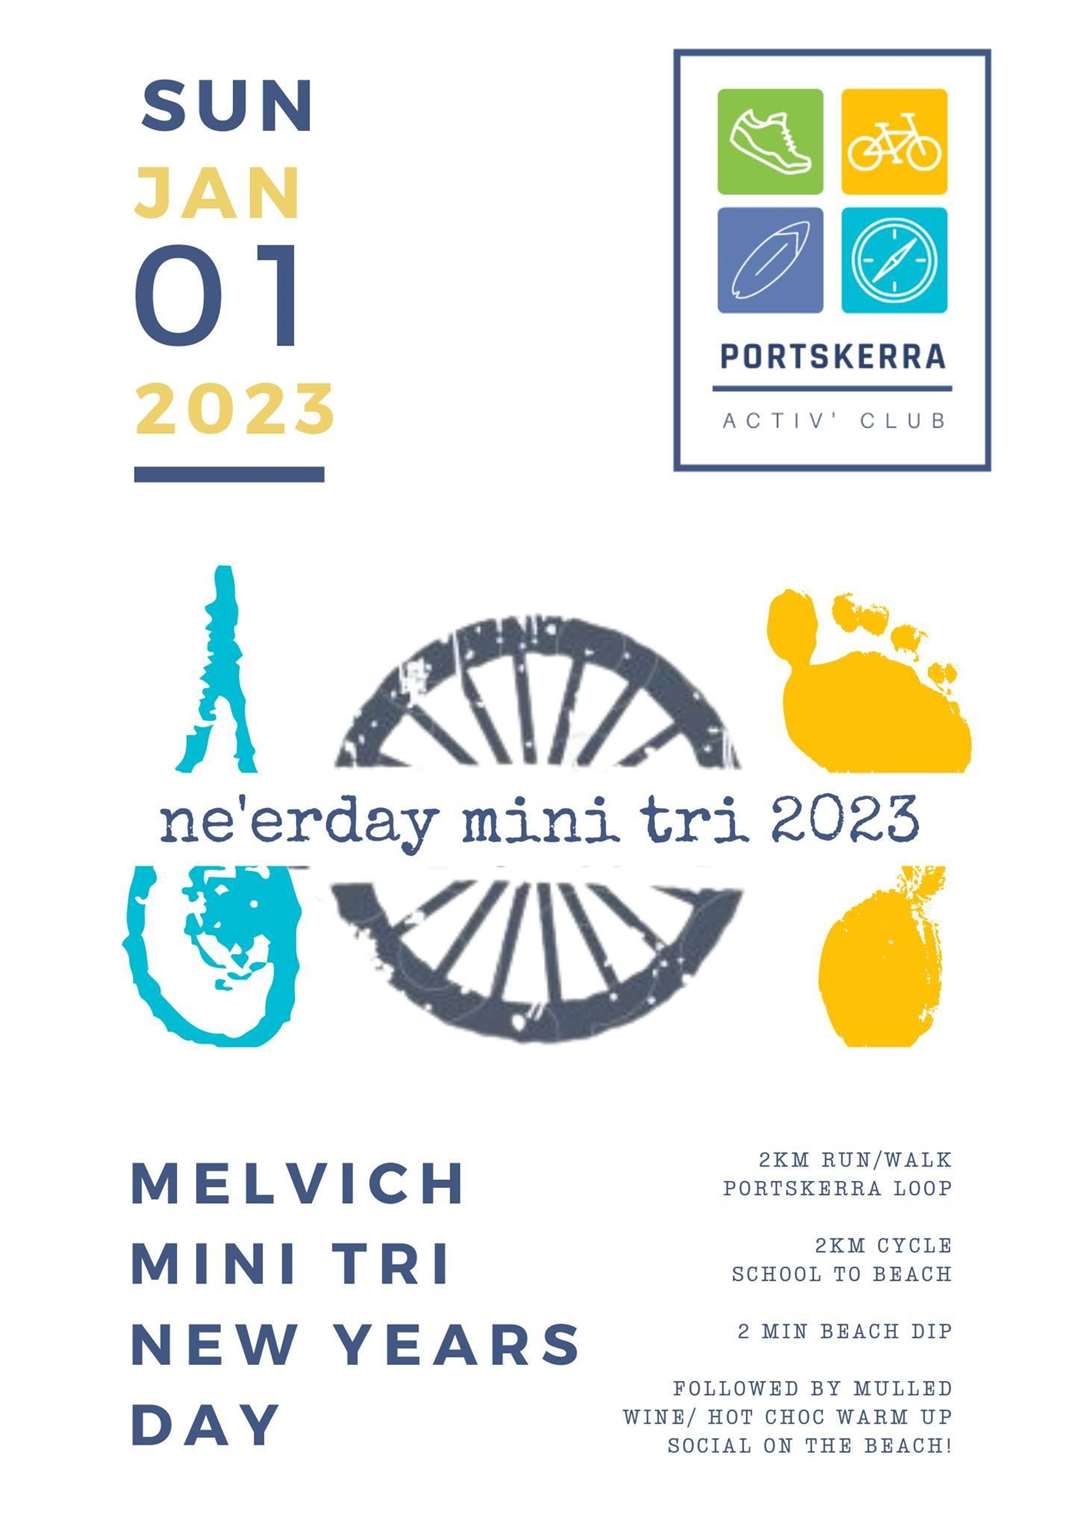 The Melvich Mini Tri will take place on New Year's Day.